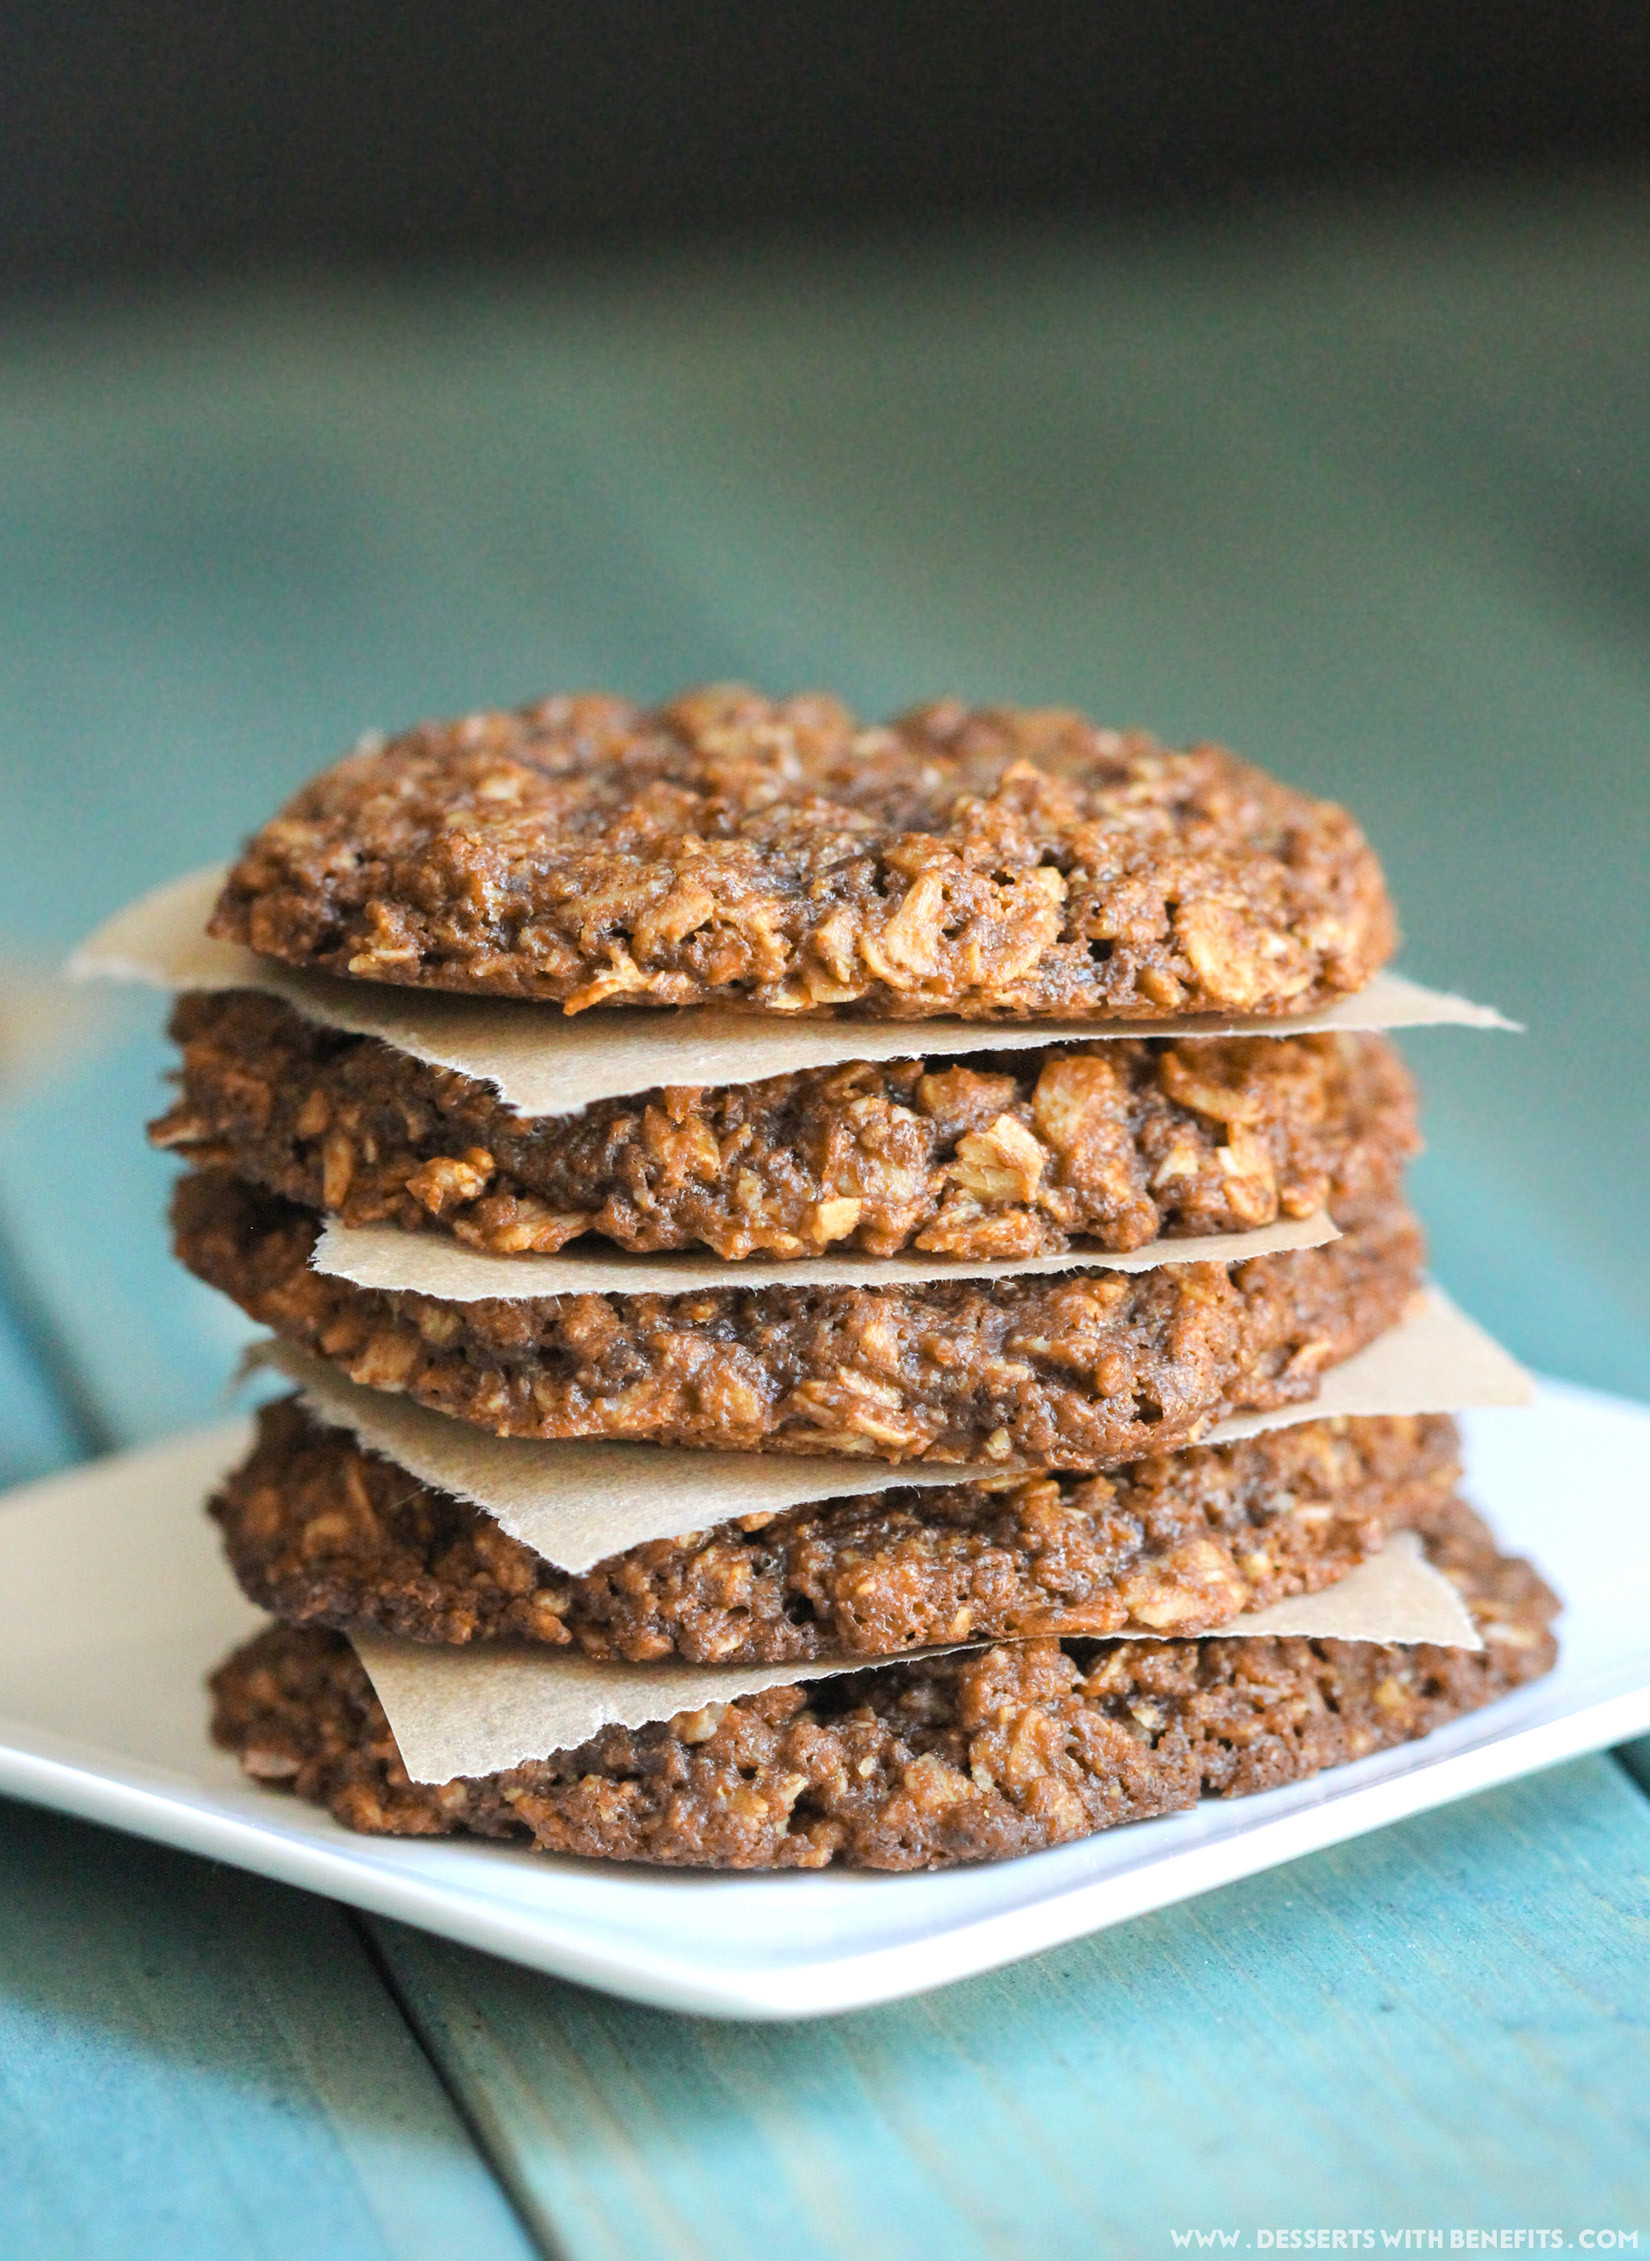 Peanut Butter Oatmeal Cookies Healthy
 Healthy Chewy Peanut Butter Oatmeal Cookies recipe gluten